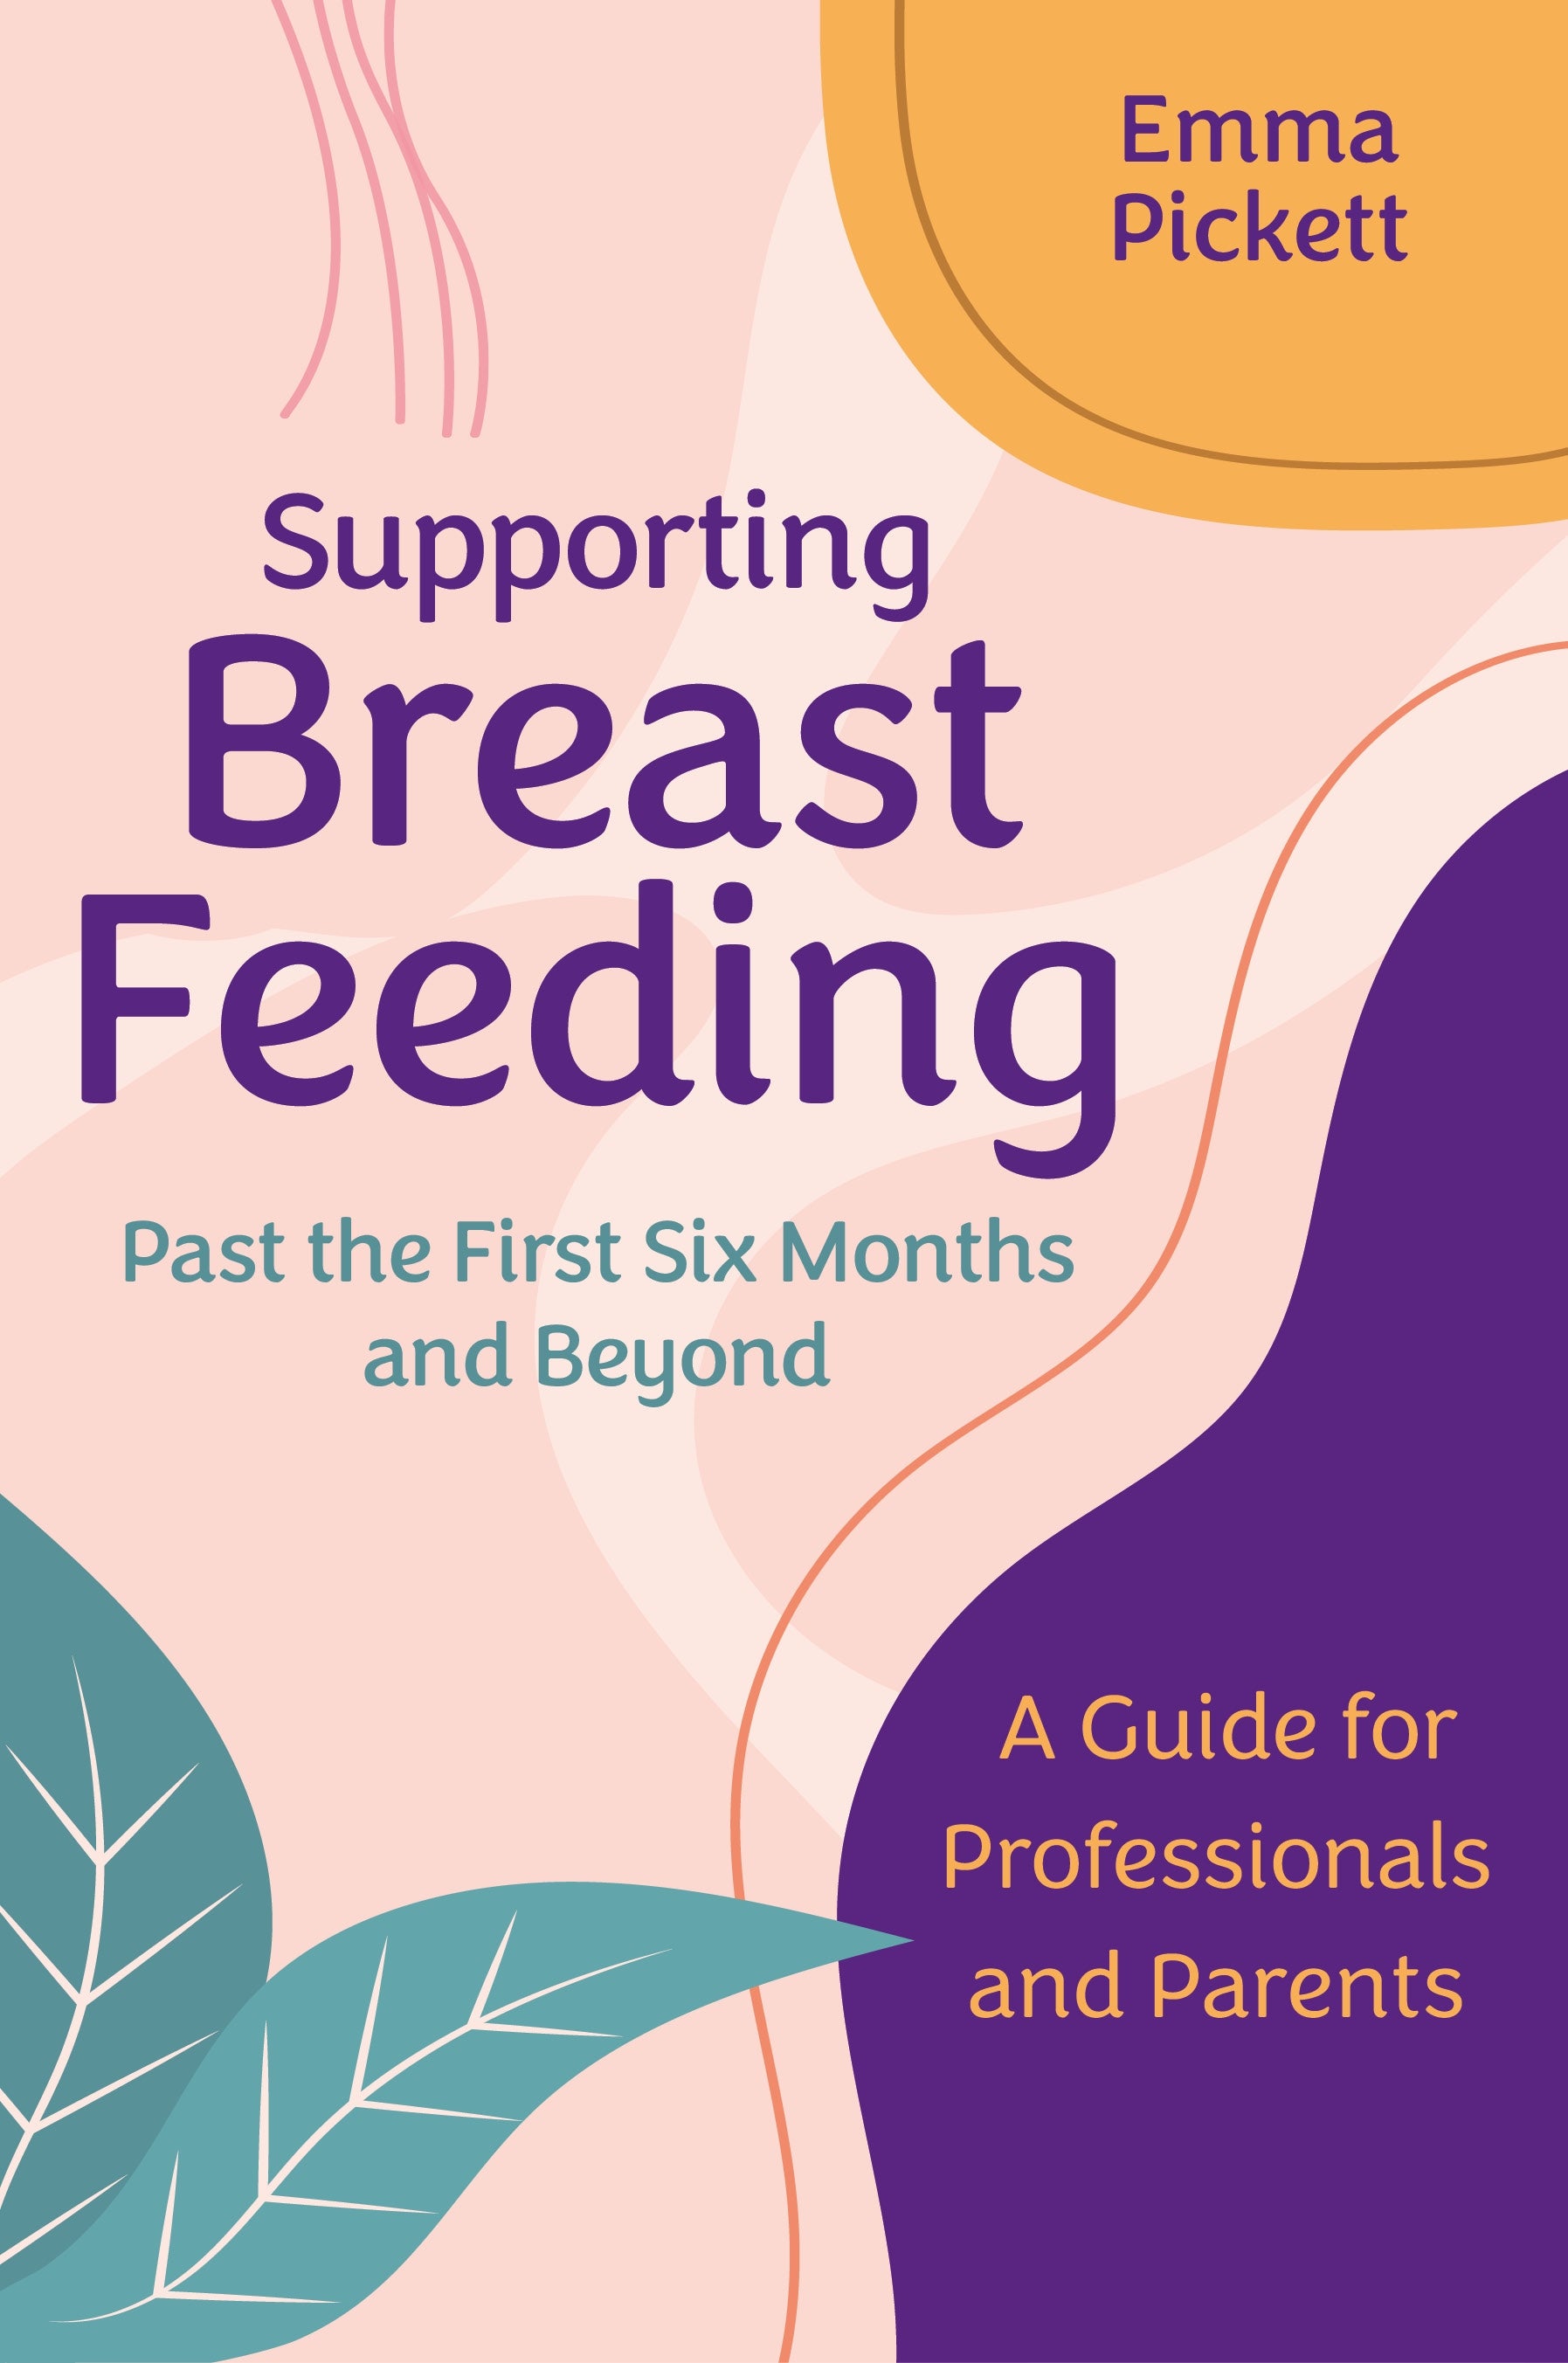 Supporting Breastfeeding Past the First Six Months and Beyond by Emma Pickett